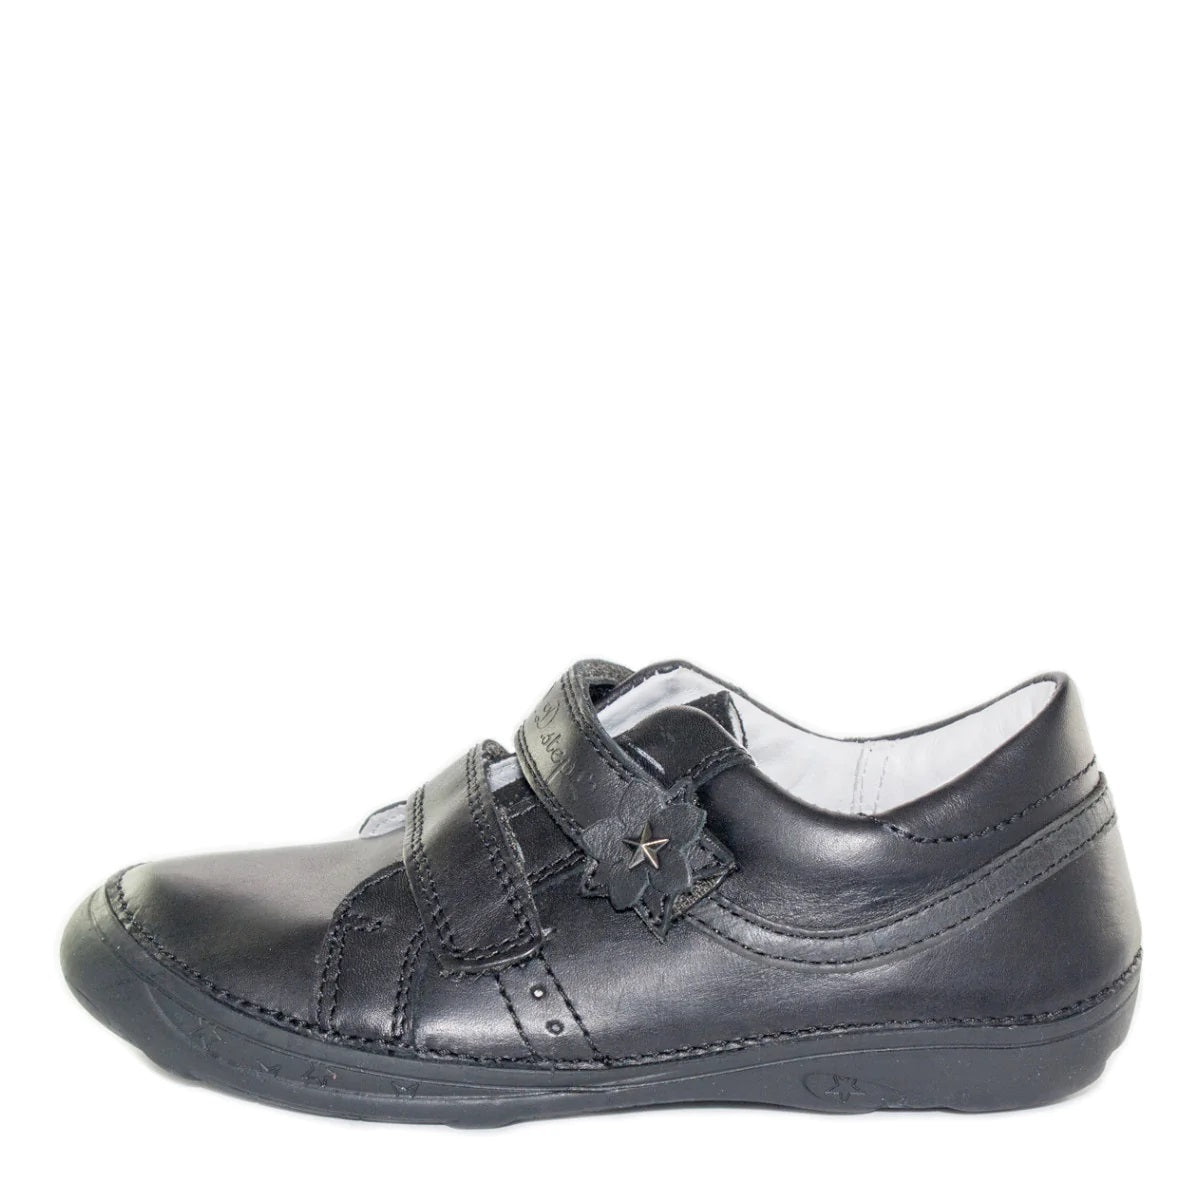 Premium quality shoes with genuine leather lining and upper in shiny black with double velcro strap. Thanks to its high level of specialization, D.D. Step knows exactly what your child’s feet need, to develop properly in the various phases of growth. The exceptional comfort these shoes provide assure the well-being and happiness of your child.